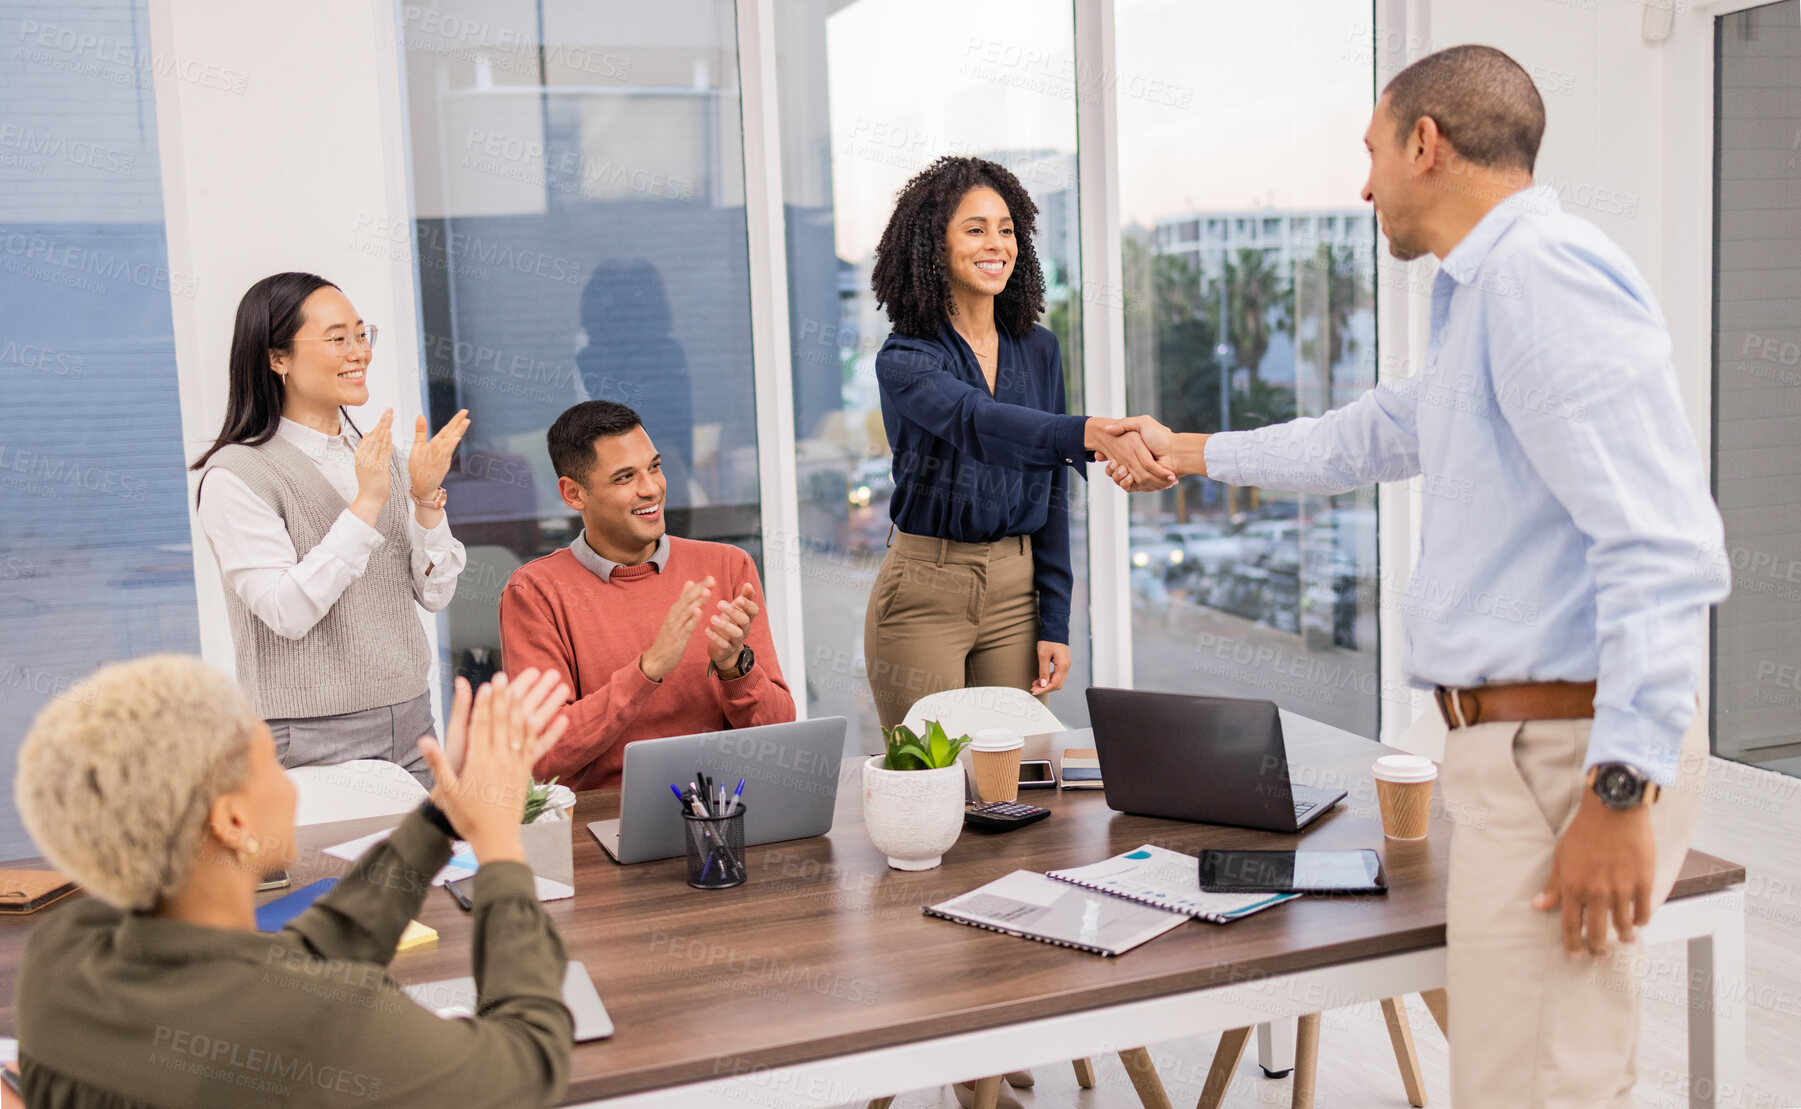 Buy stock photo B2b success, black woman or man shaking hands in meeting or startup project partnership or business deal. Handshake or happy worker talking or speaking of sales goals, feedback or hiring agreement